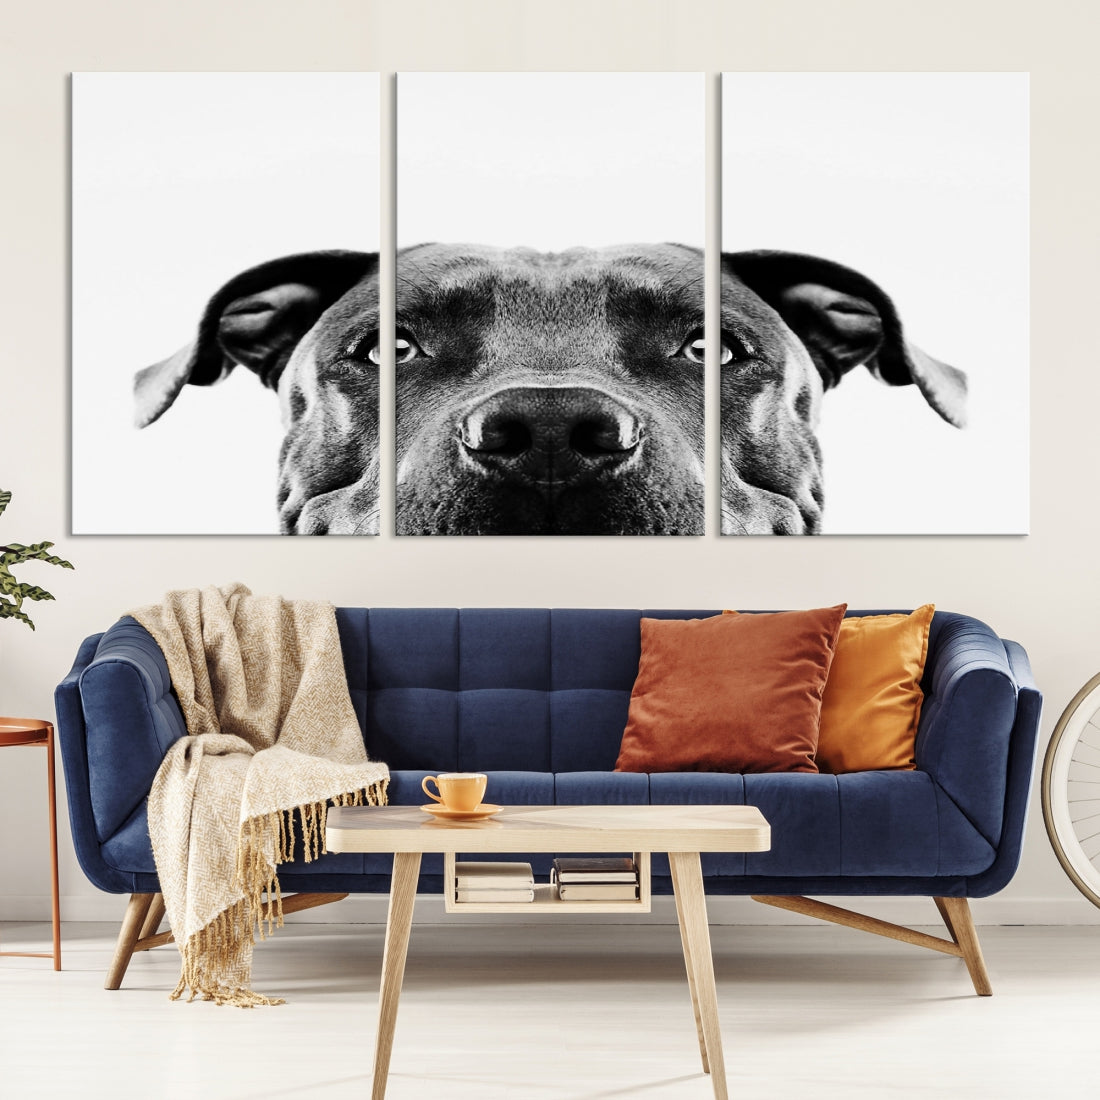 Black and Wwhite Pit Bull Dog Wall Art Canvas Print